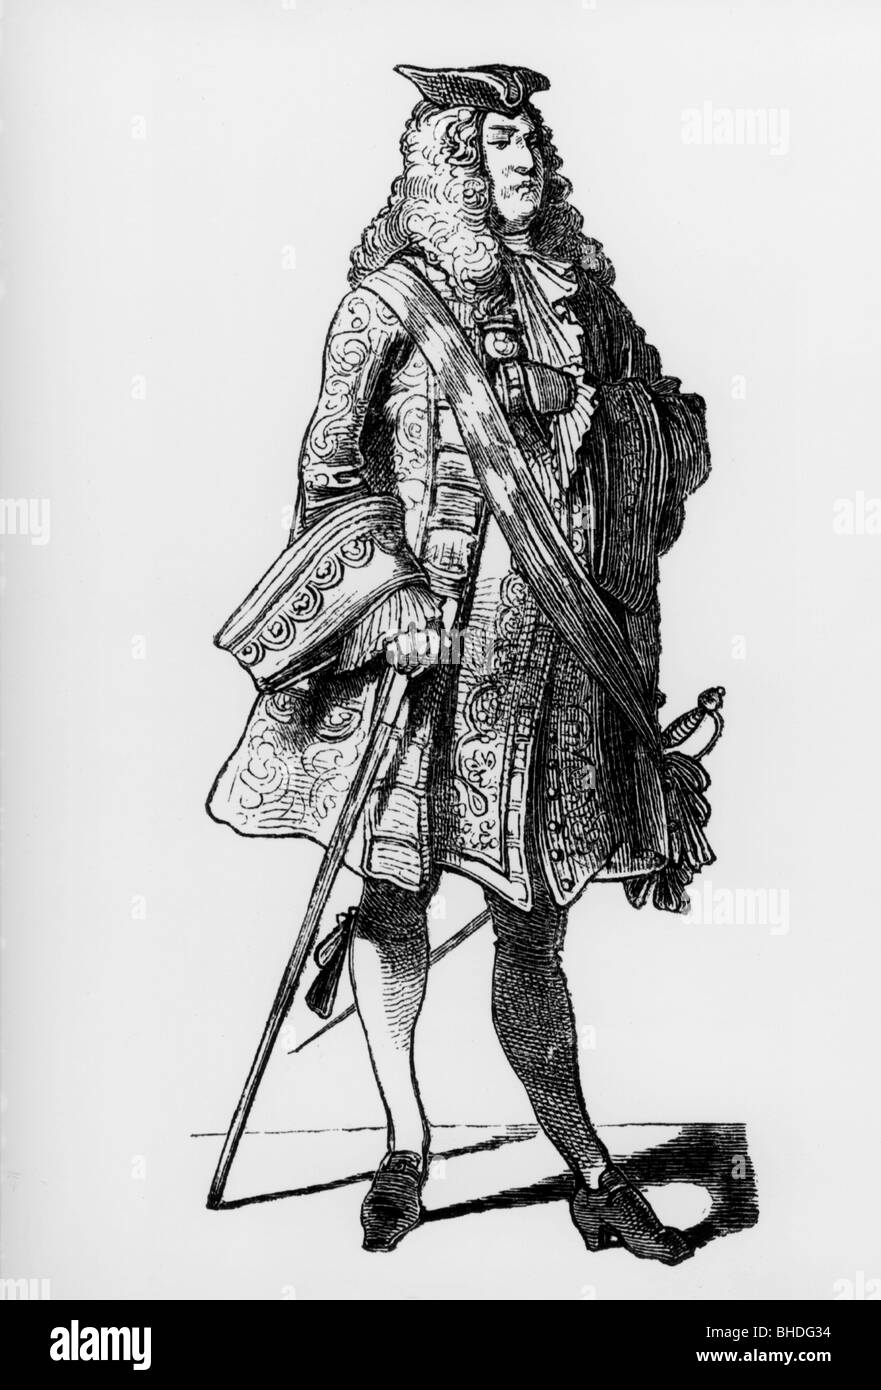 fashion, 18th century, 'Der Fuerst' (The Prince), illustration from 'Muenchner Bilderbogen' (Munich Sheet of Pictures), wood engraving, 19th century, Stock Photo